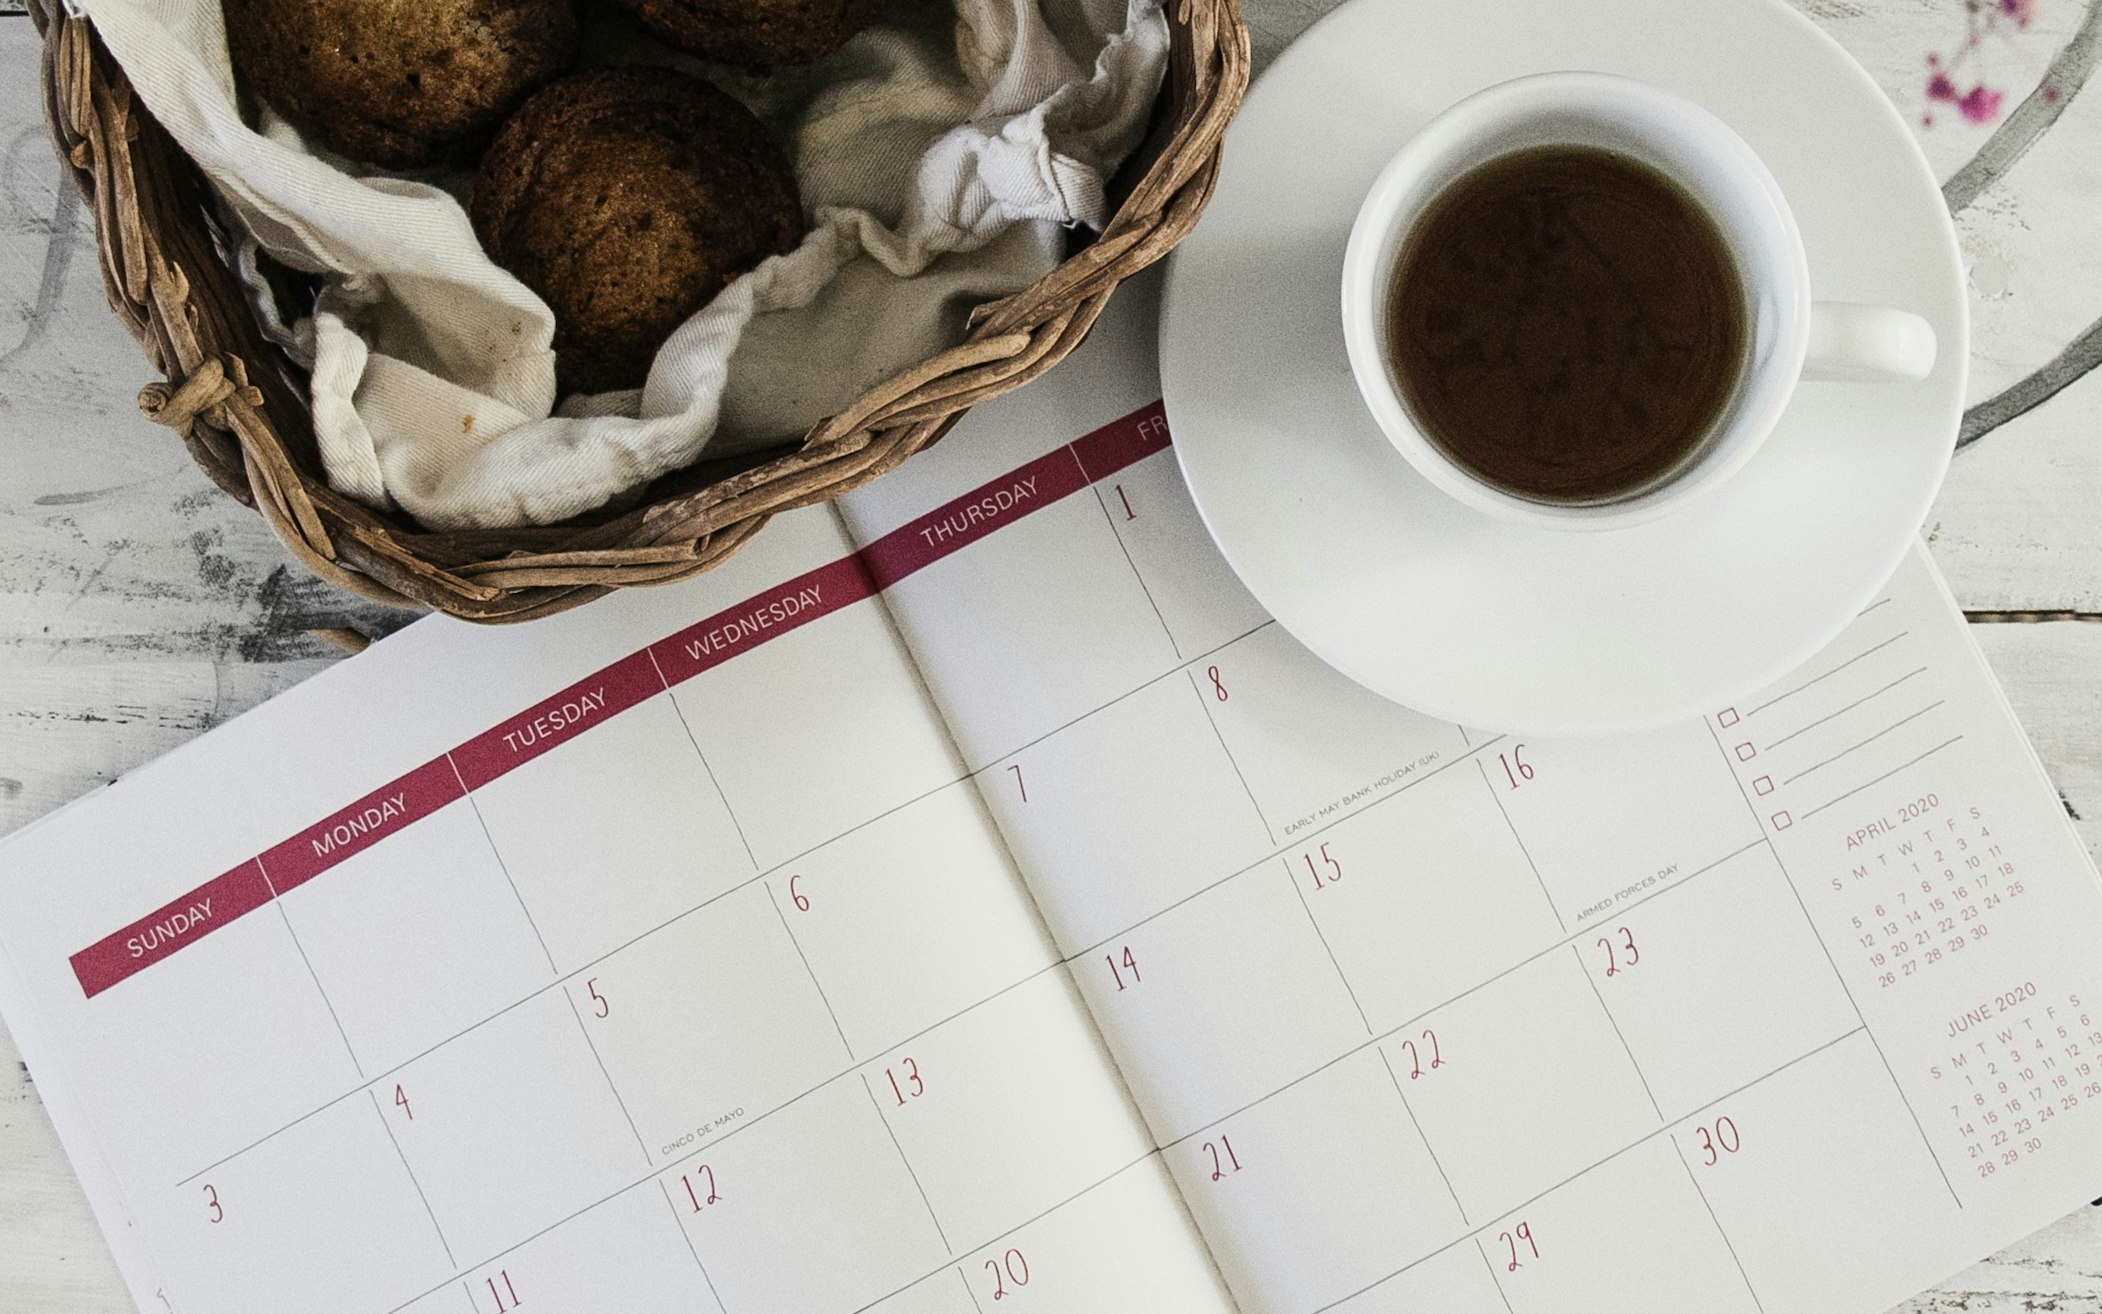 Calendar with muffins and coffee cup